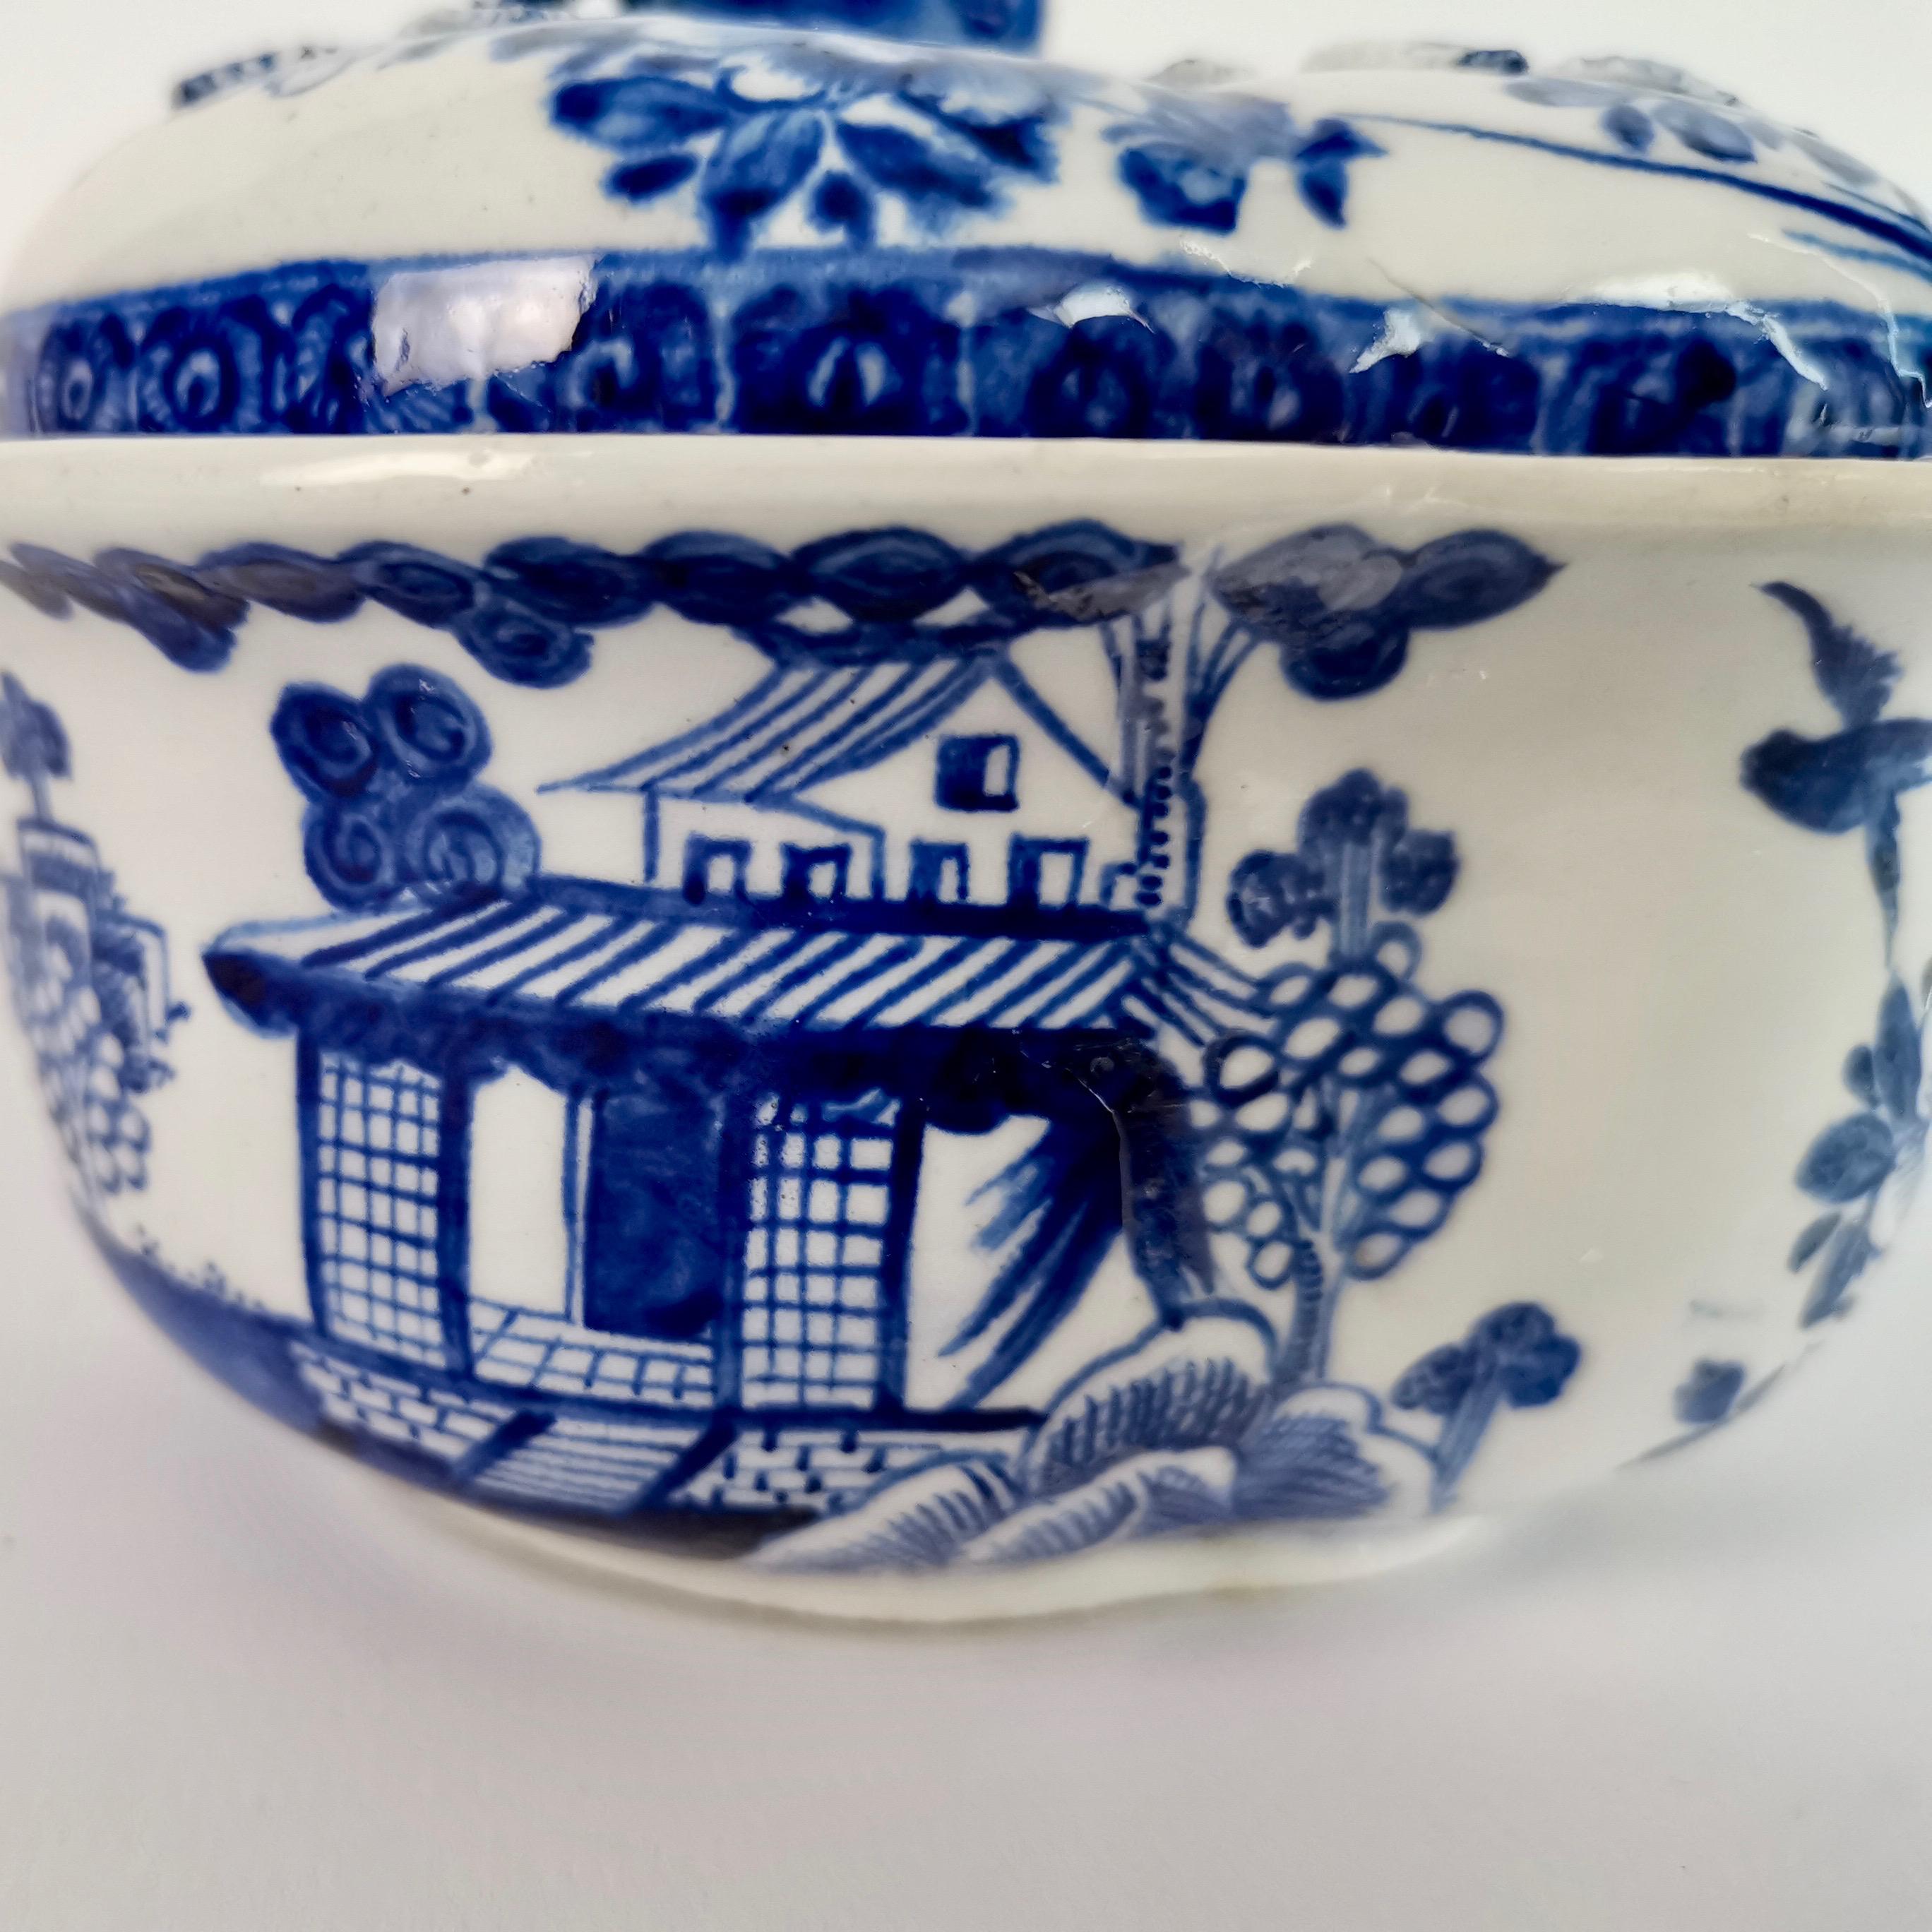 Derby Porcelain Cream Pot with Cover, Blue and White, ca 1765 1